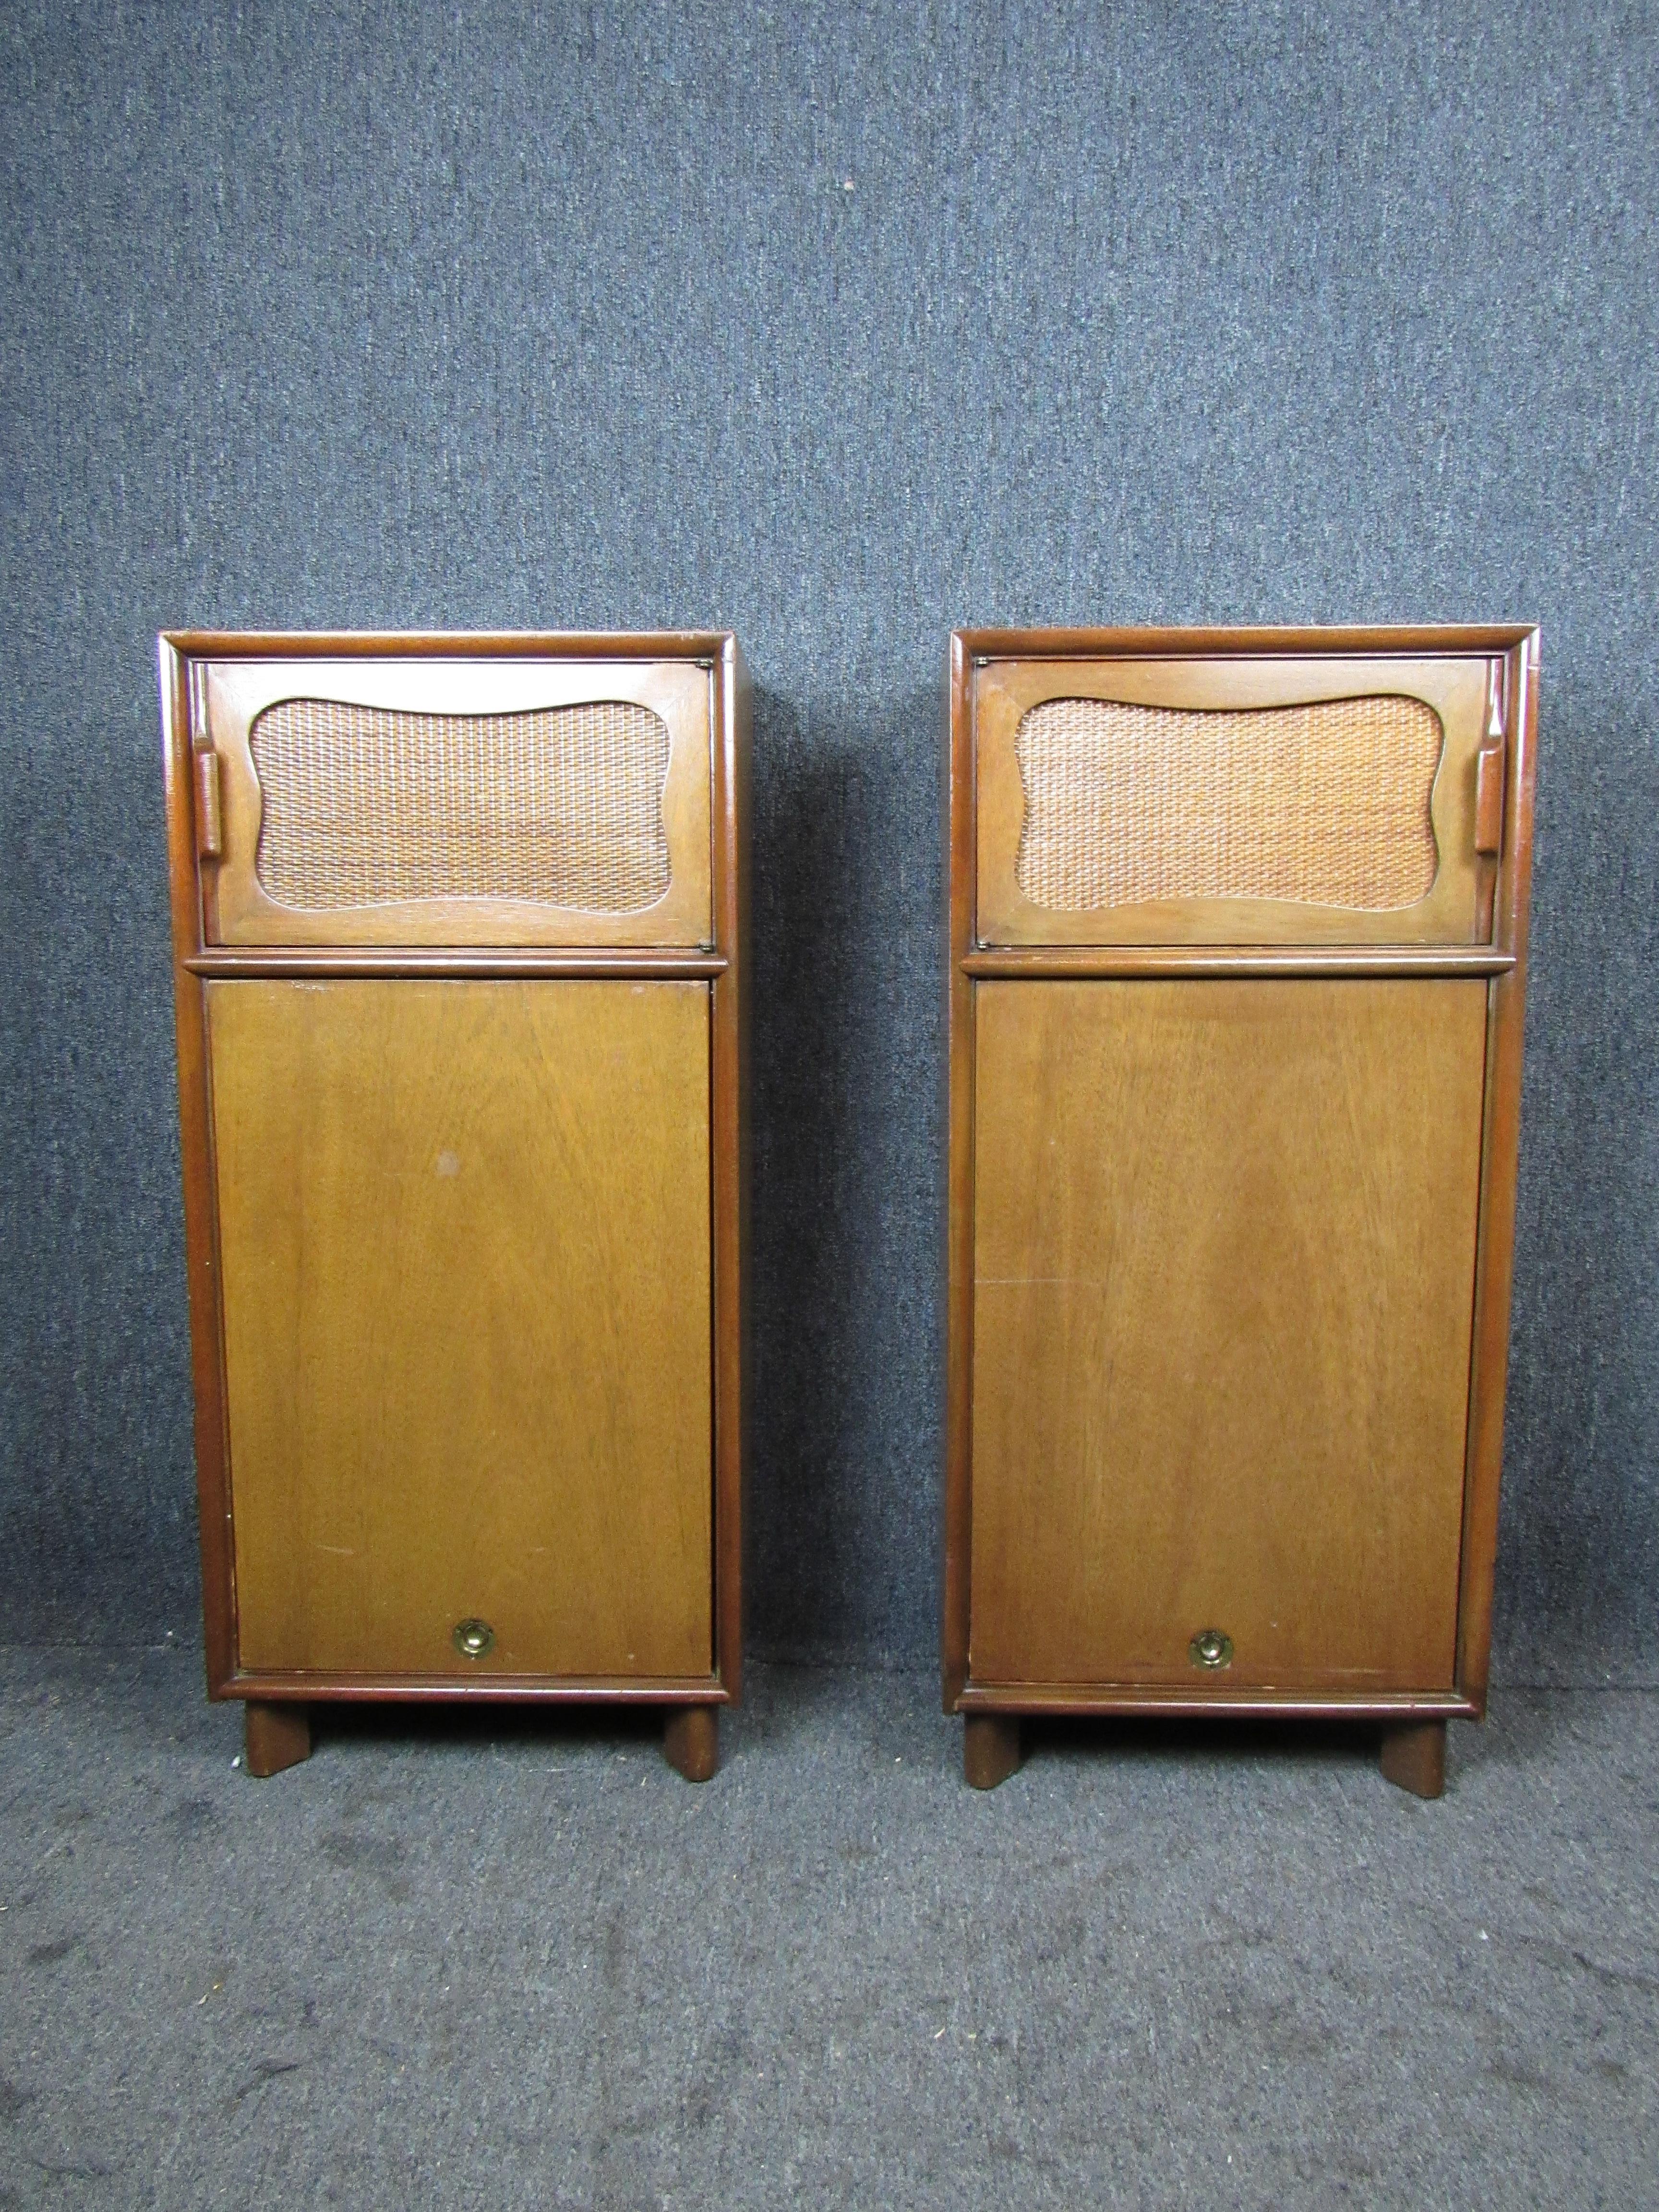 Here's a fantastic pair of vintage Mid-Century Modern nightstands! Featuring an unusual, elongated profile, rattan adornments, and a unique top-down sliding door. Rich mahogany wood grain lends a touch of class to a wide variety of decor styles.